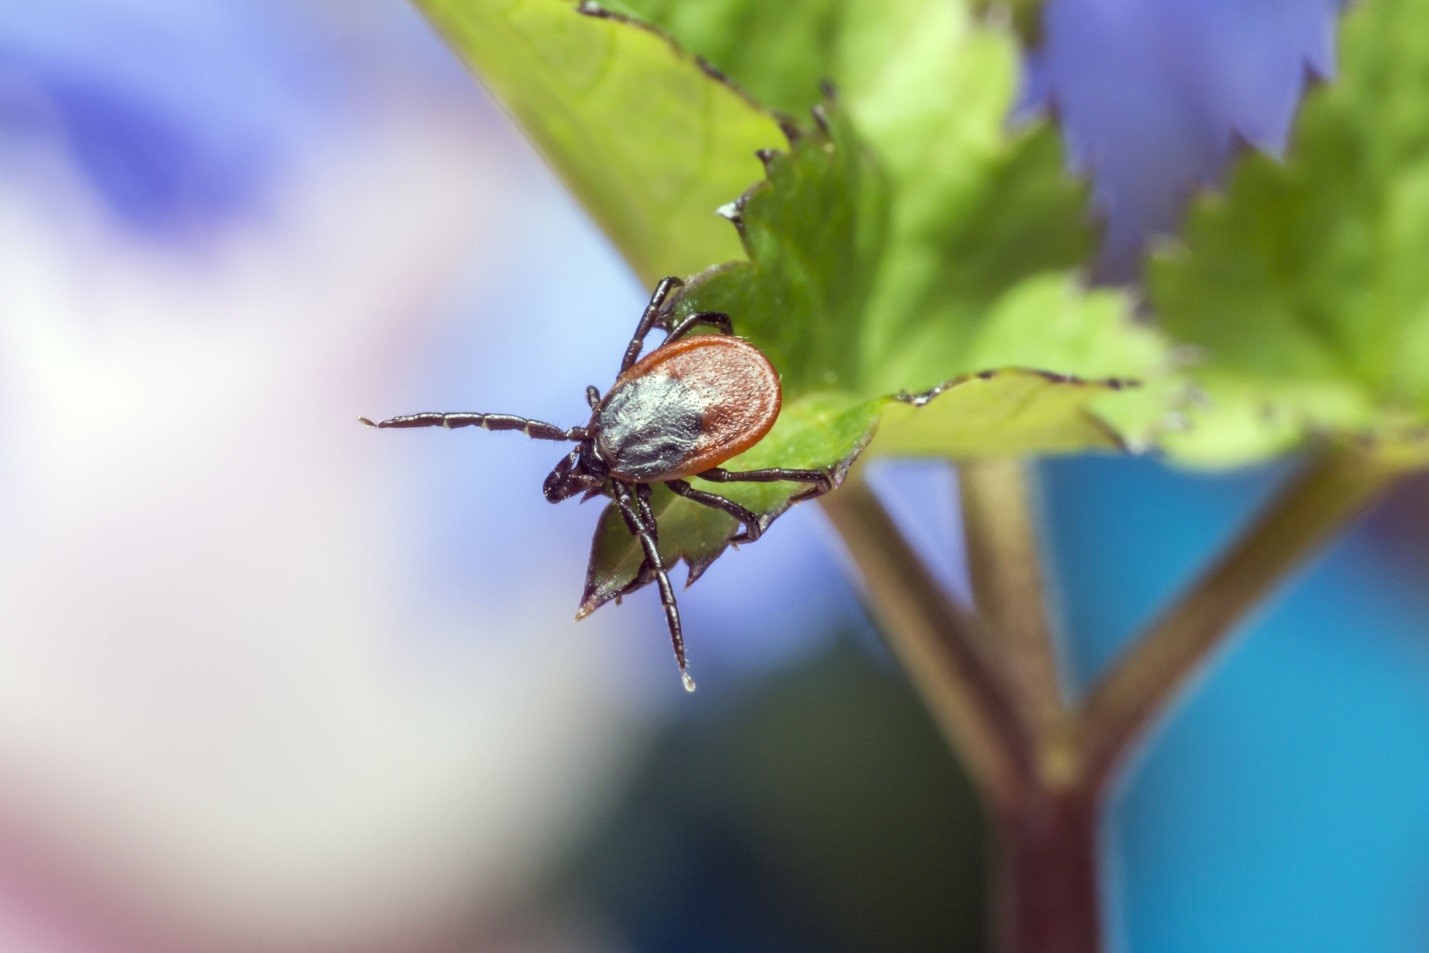 Summer May Be Over, but Tick Danger Is Not